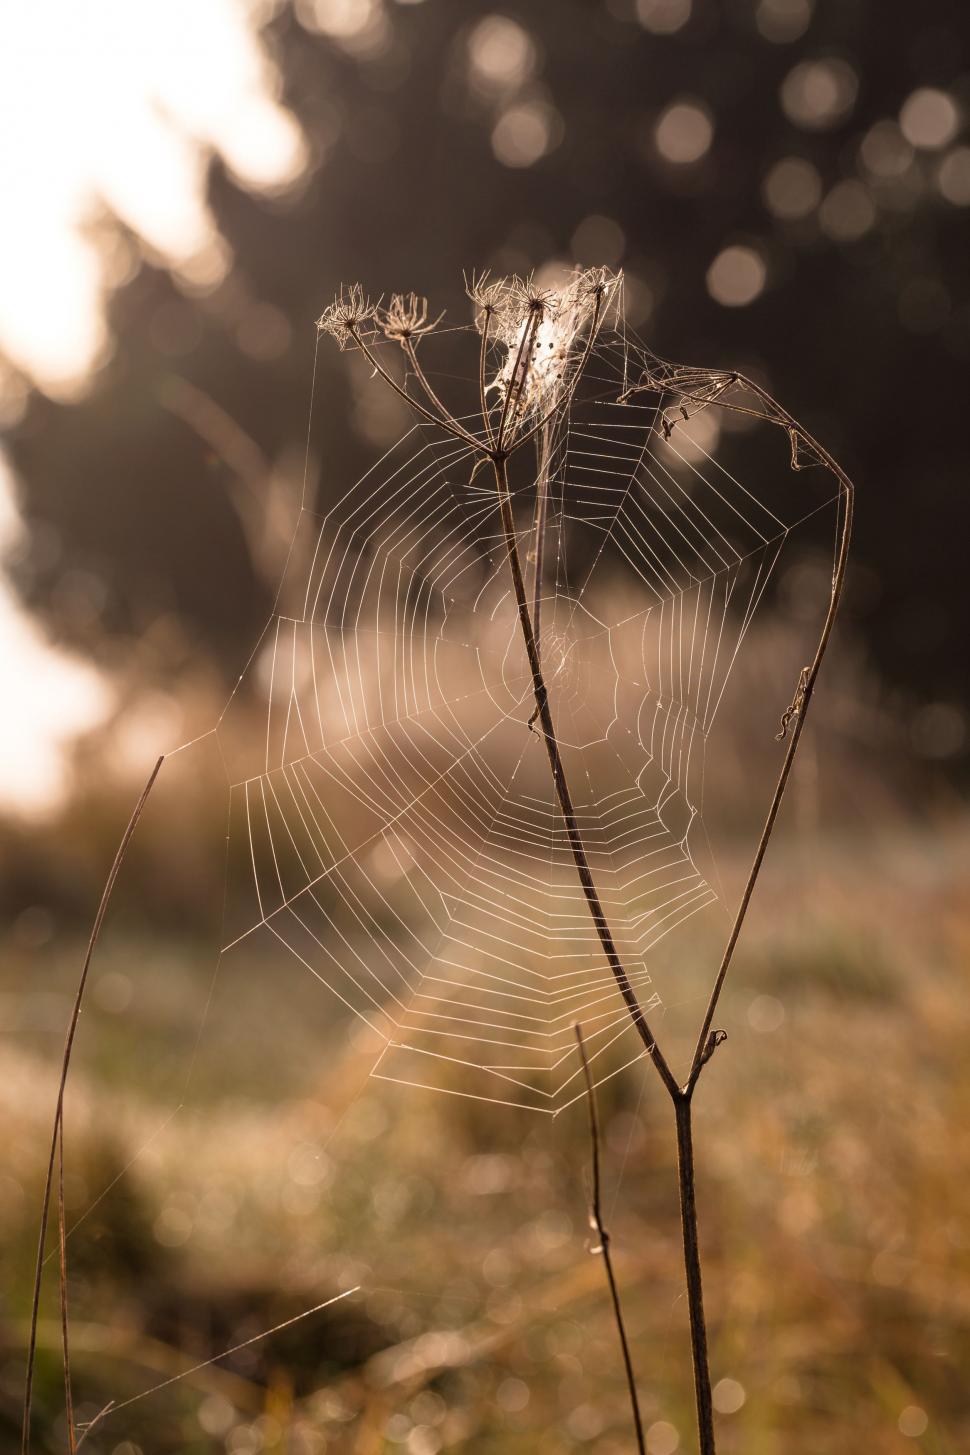 Free Image of Spider Web with blur background 